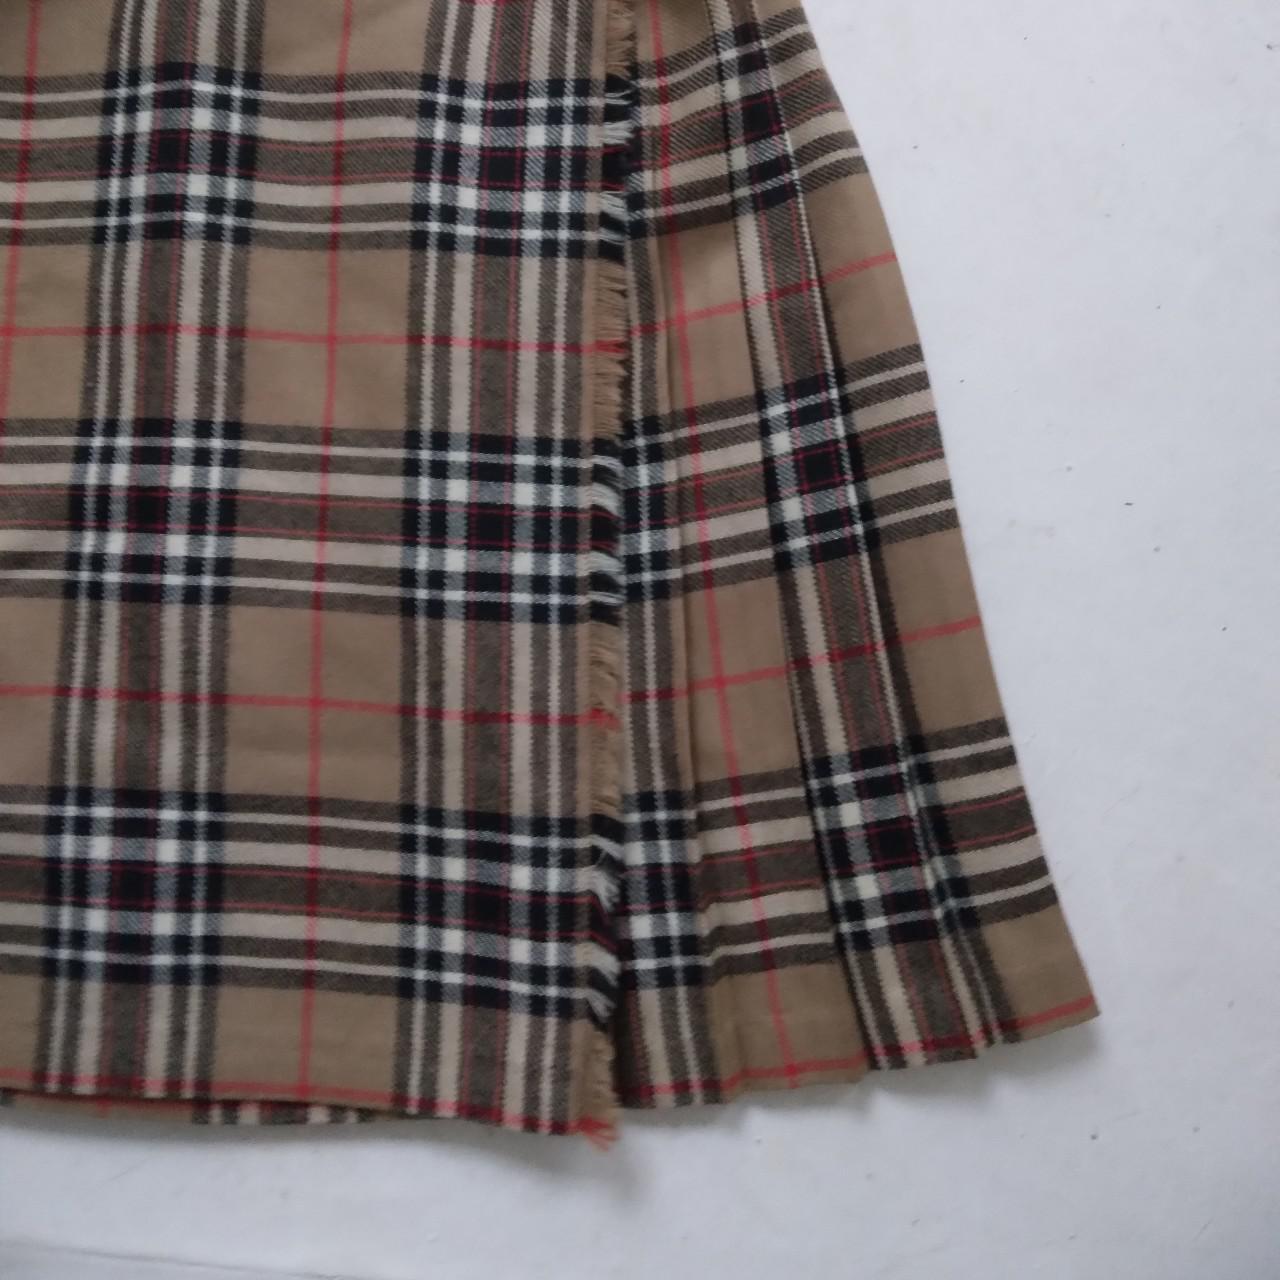 Product Image 3 - Vintage Chequered Skirt in kitchen